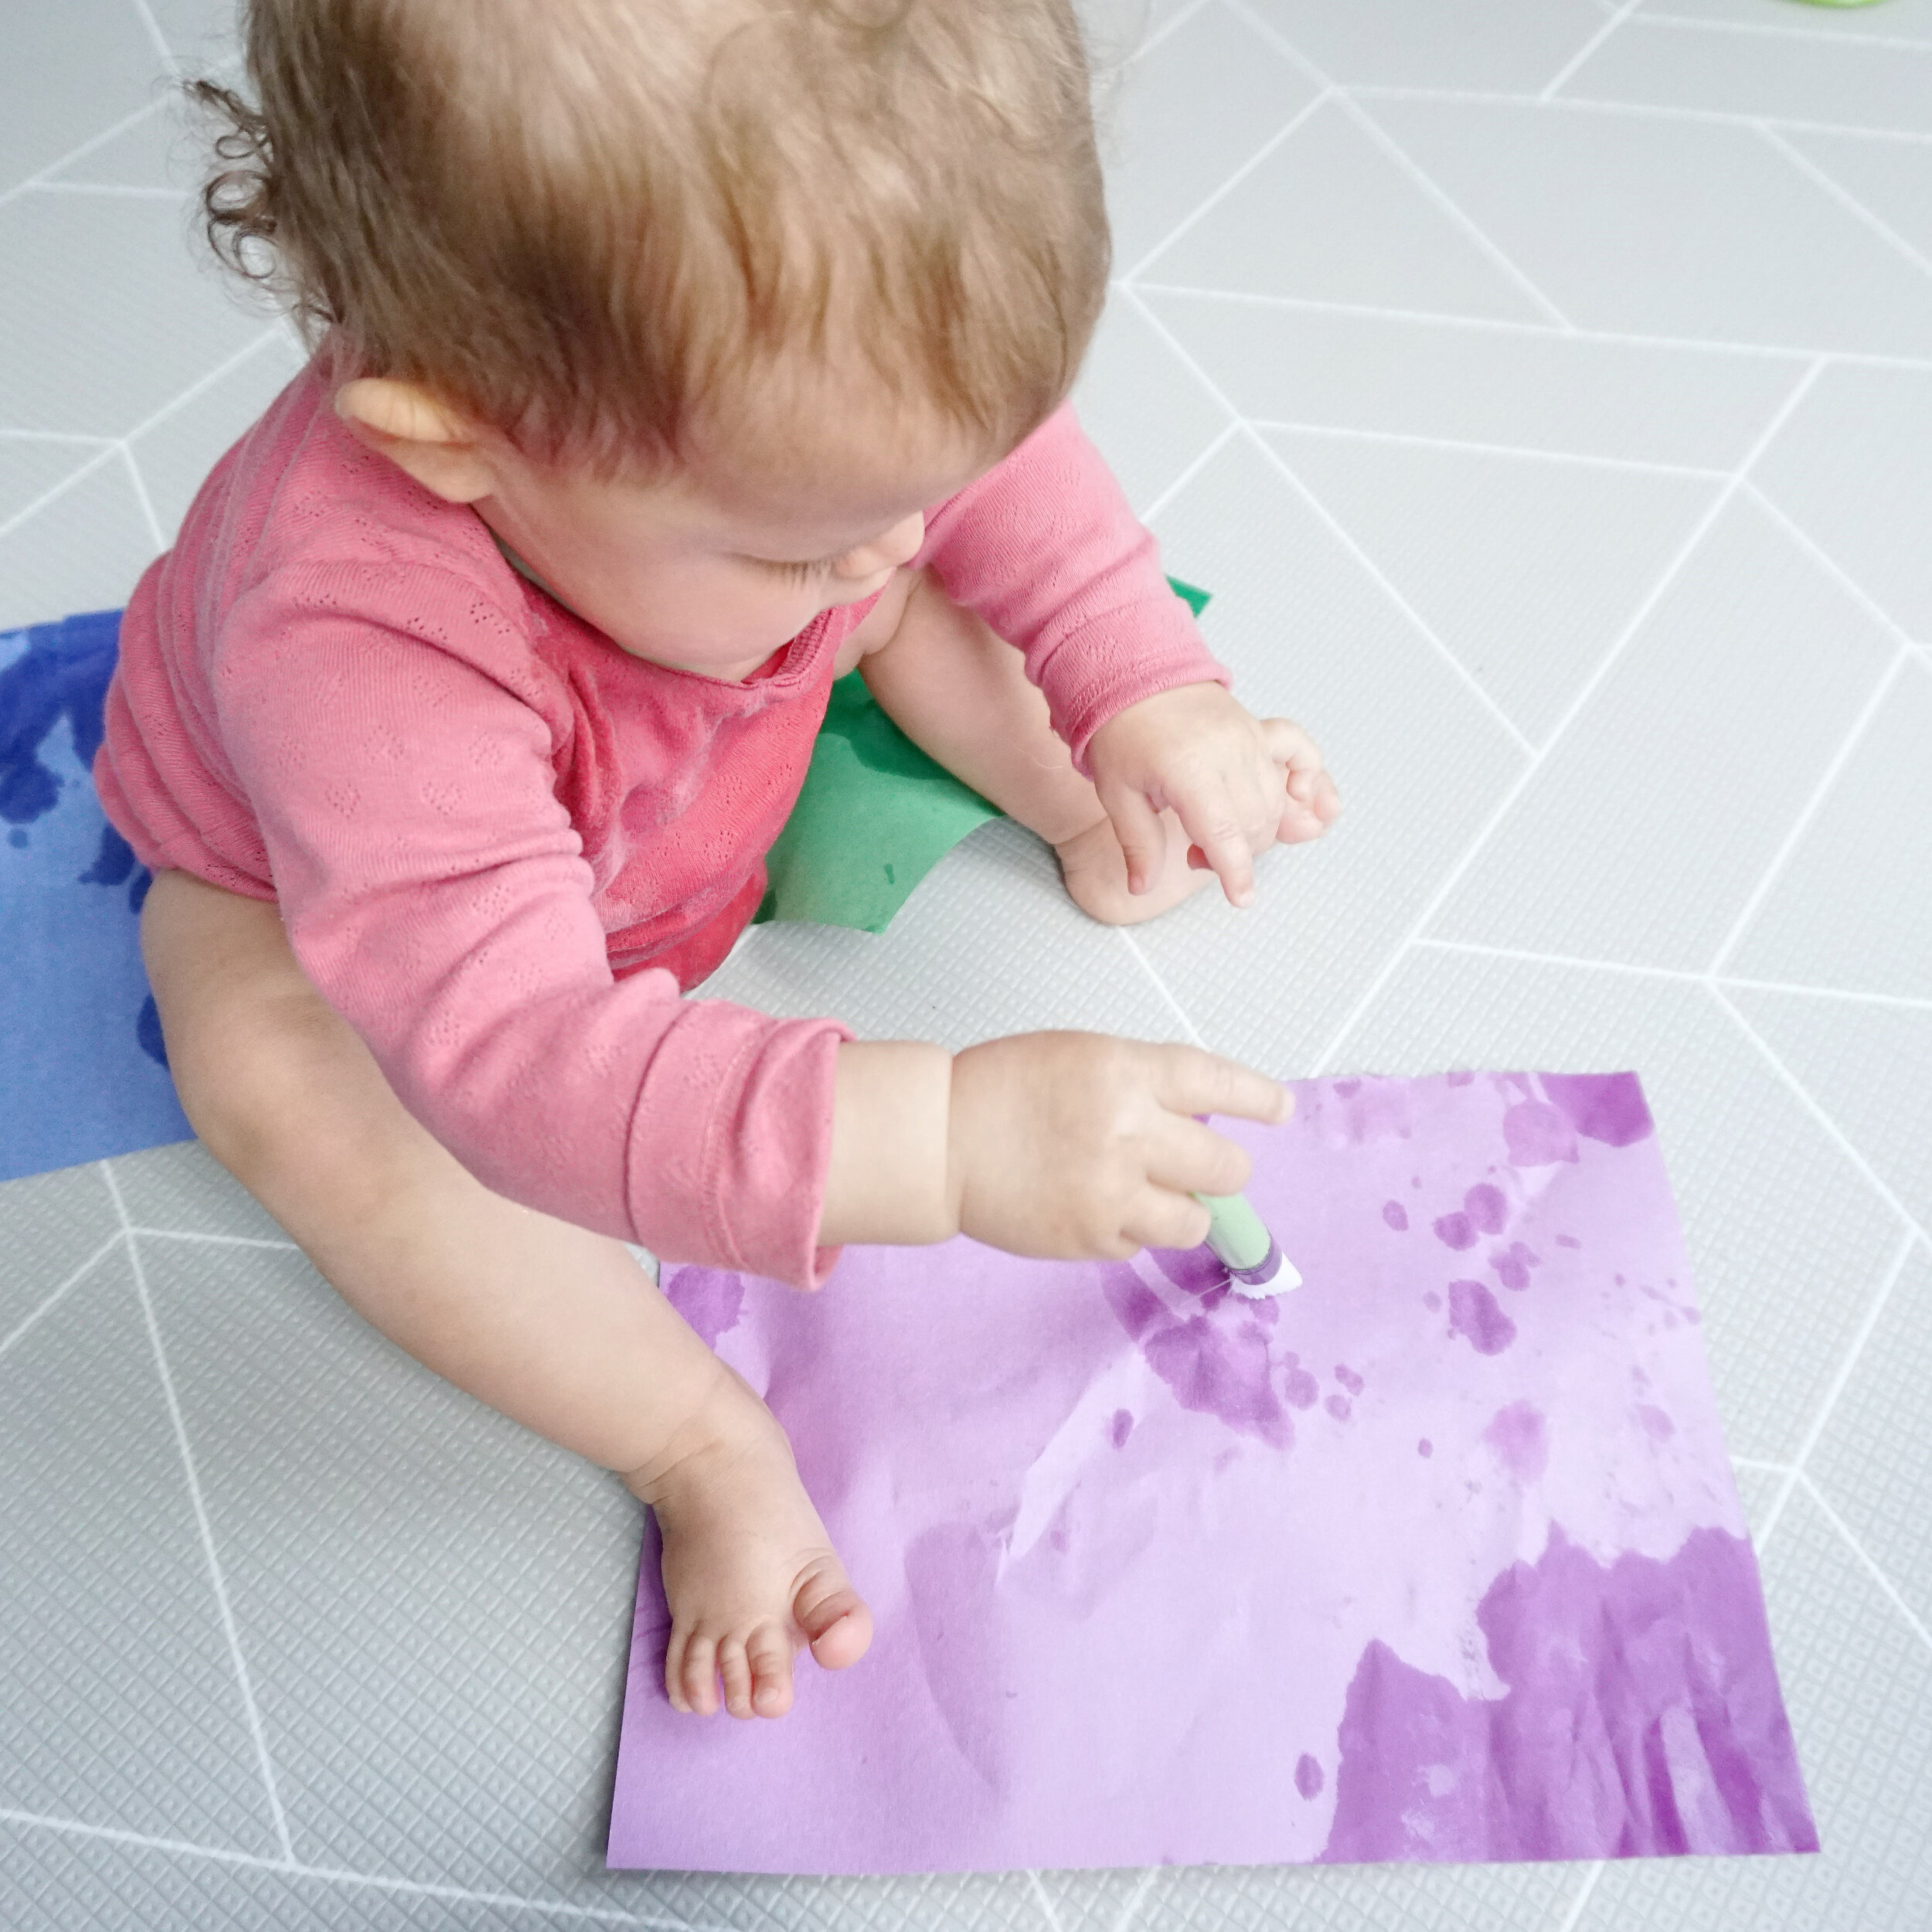 My First Paint With Water Kids' Art Pad With Paintbrush – Baby Braithwaite